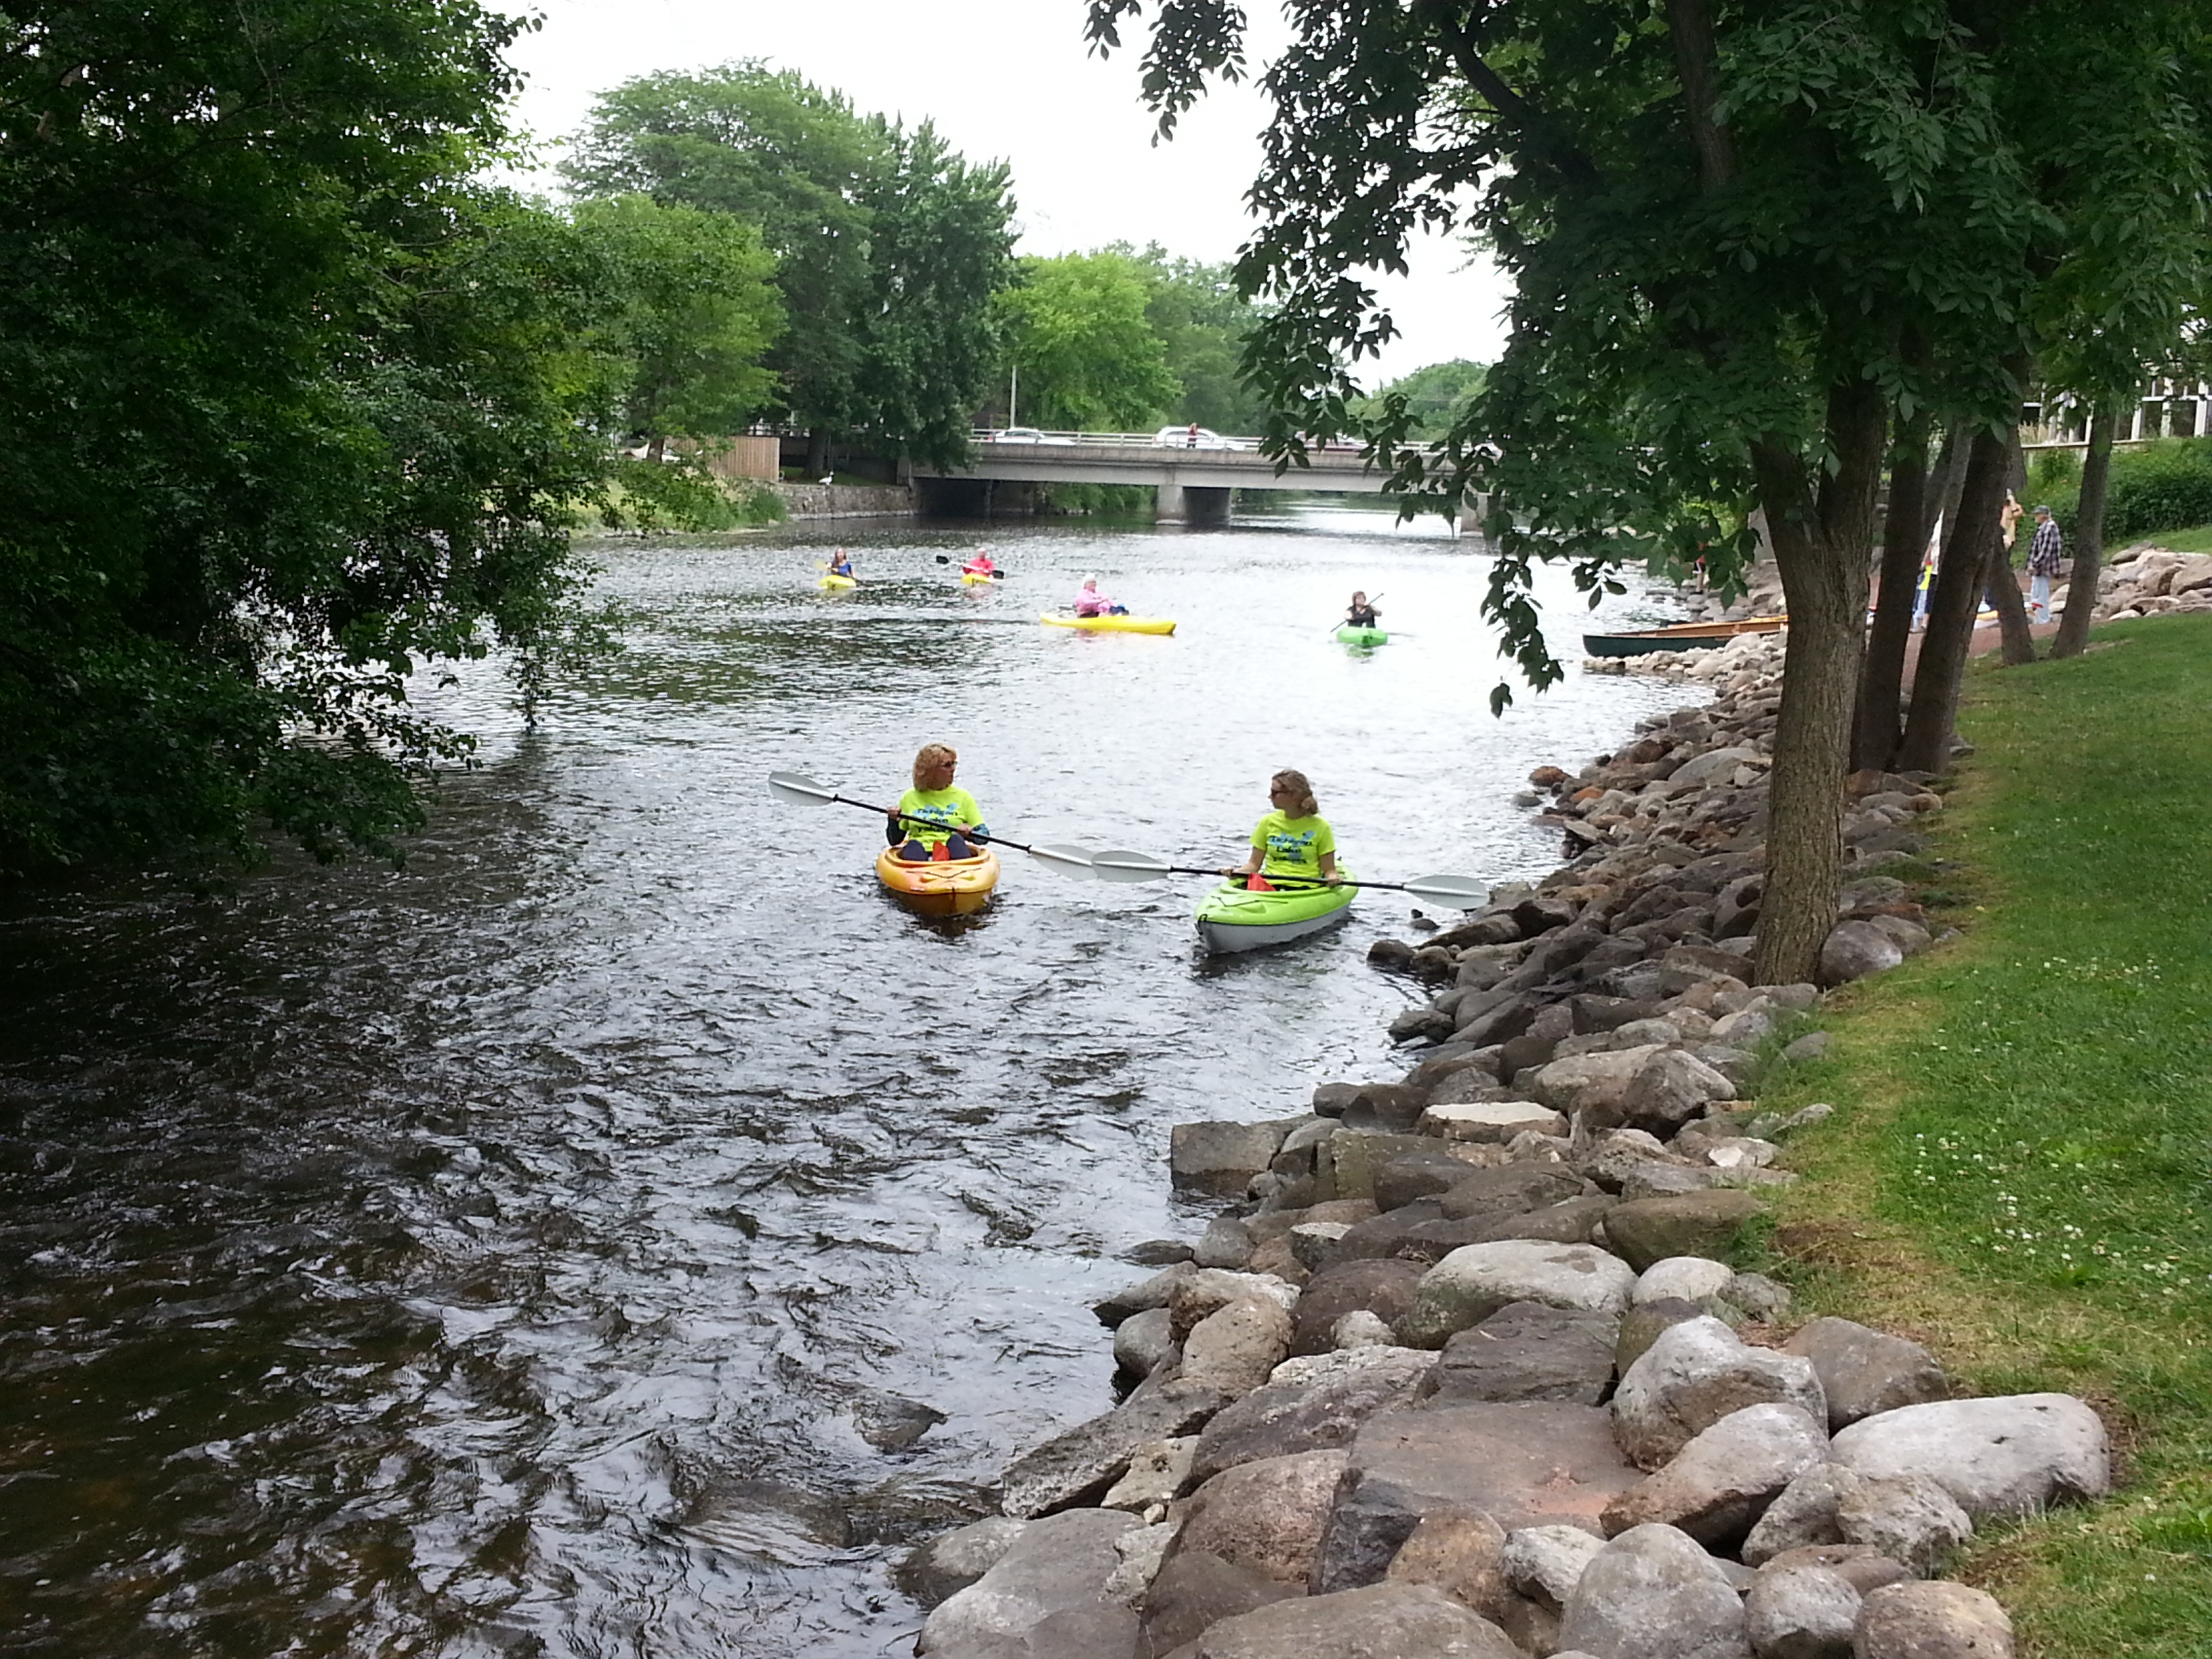 Six people in kayaks paddle down a river. Large trees line the banks.